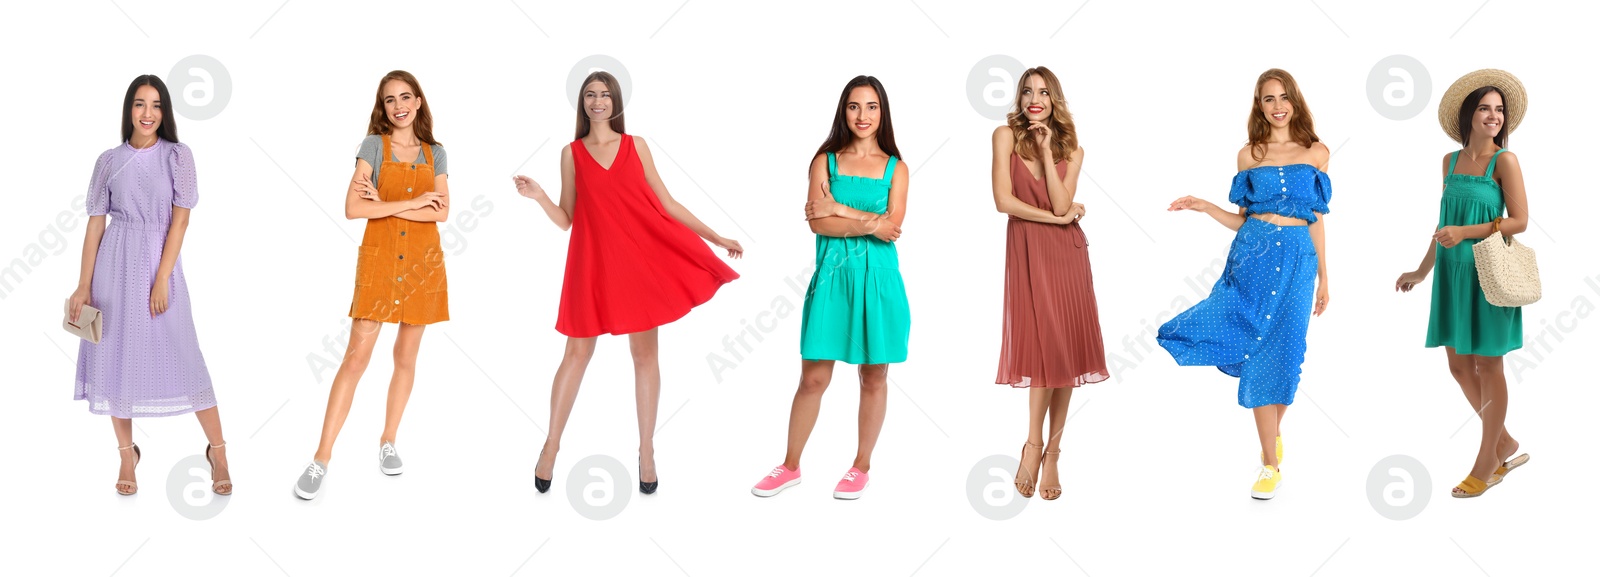 Image of Collage with full length portraits of women on white background